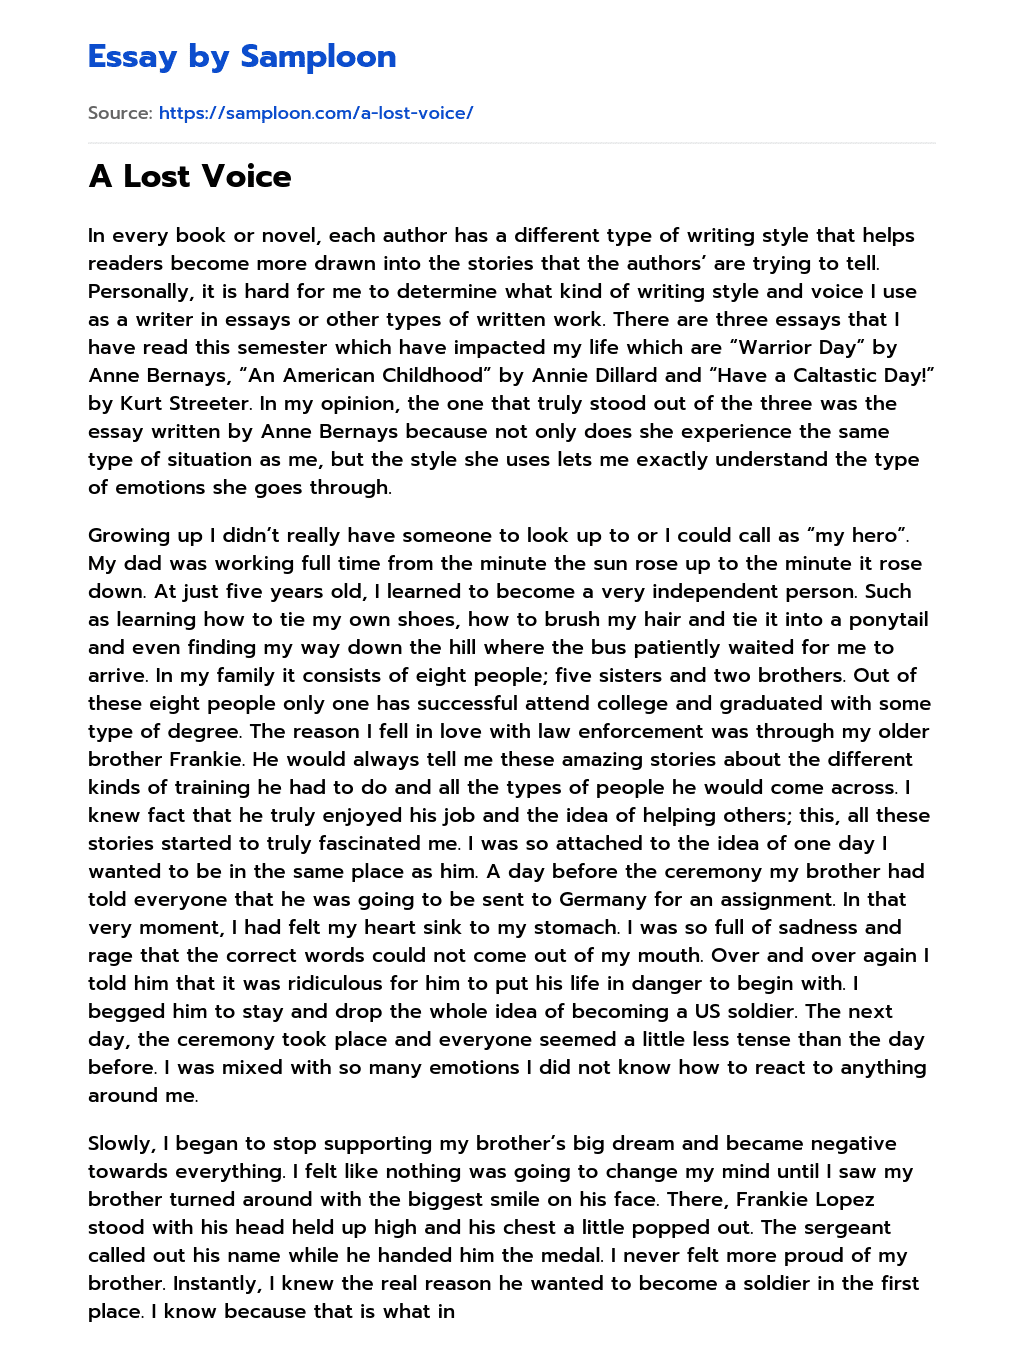 A Lost Voice  essay